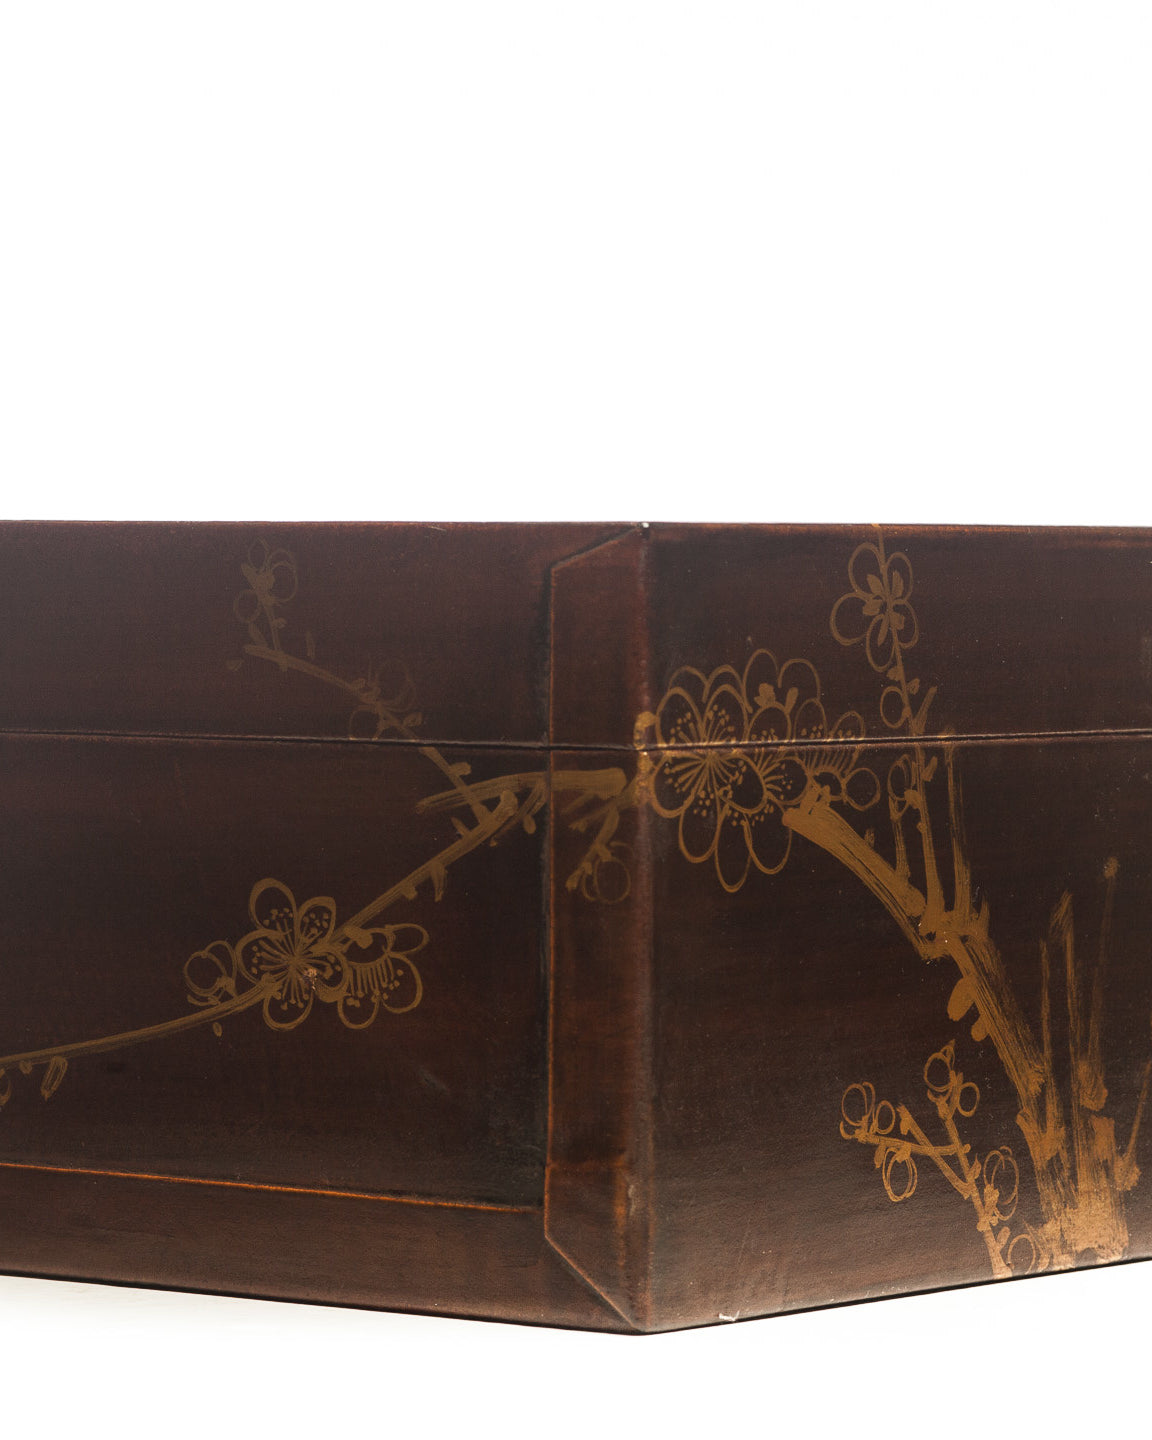 Mahogany Meridian Leather Box ( 16.5") with hand-painted winter motif